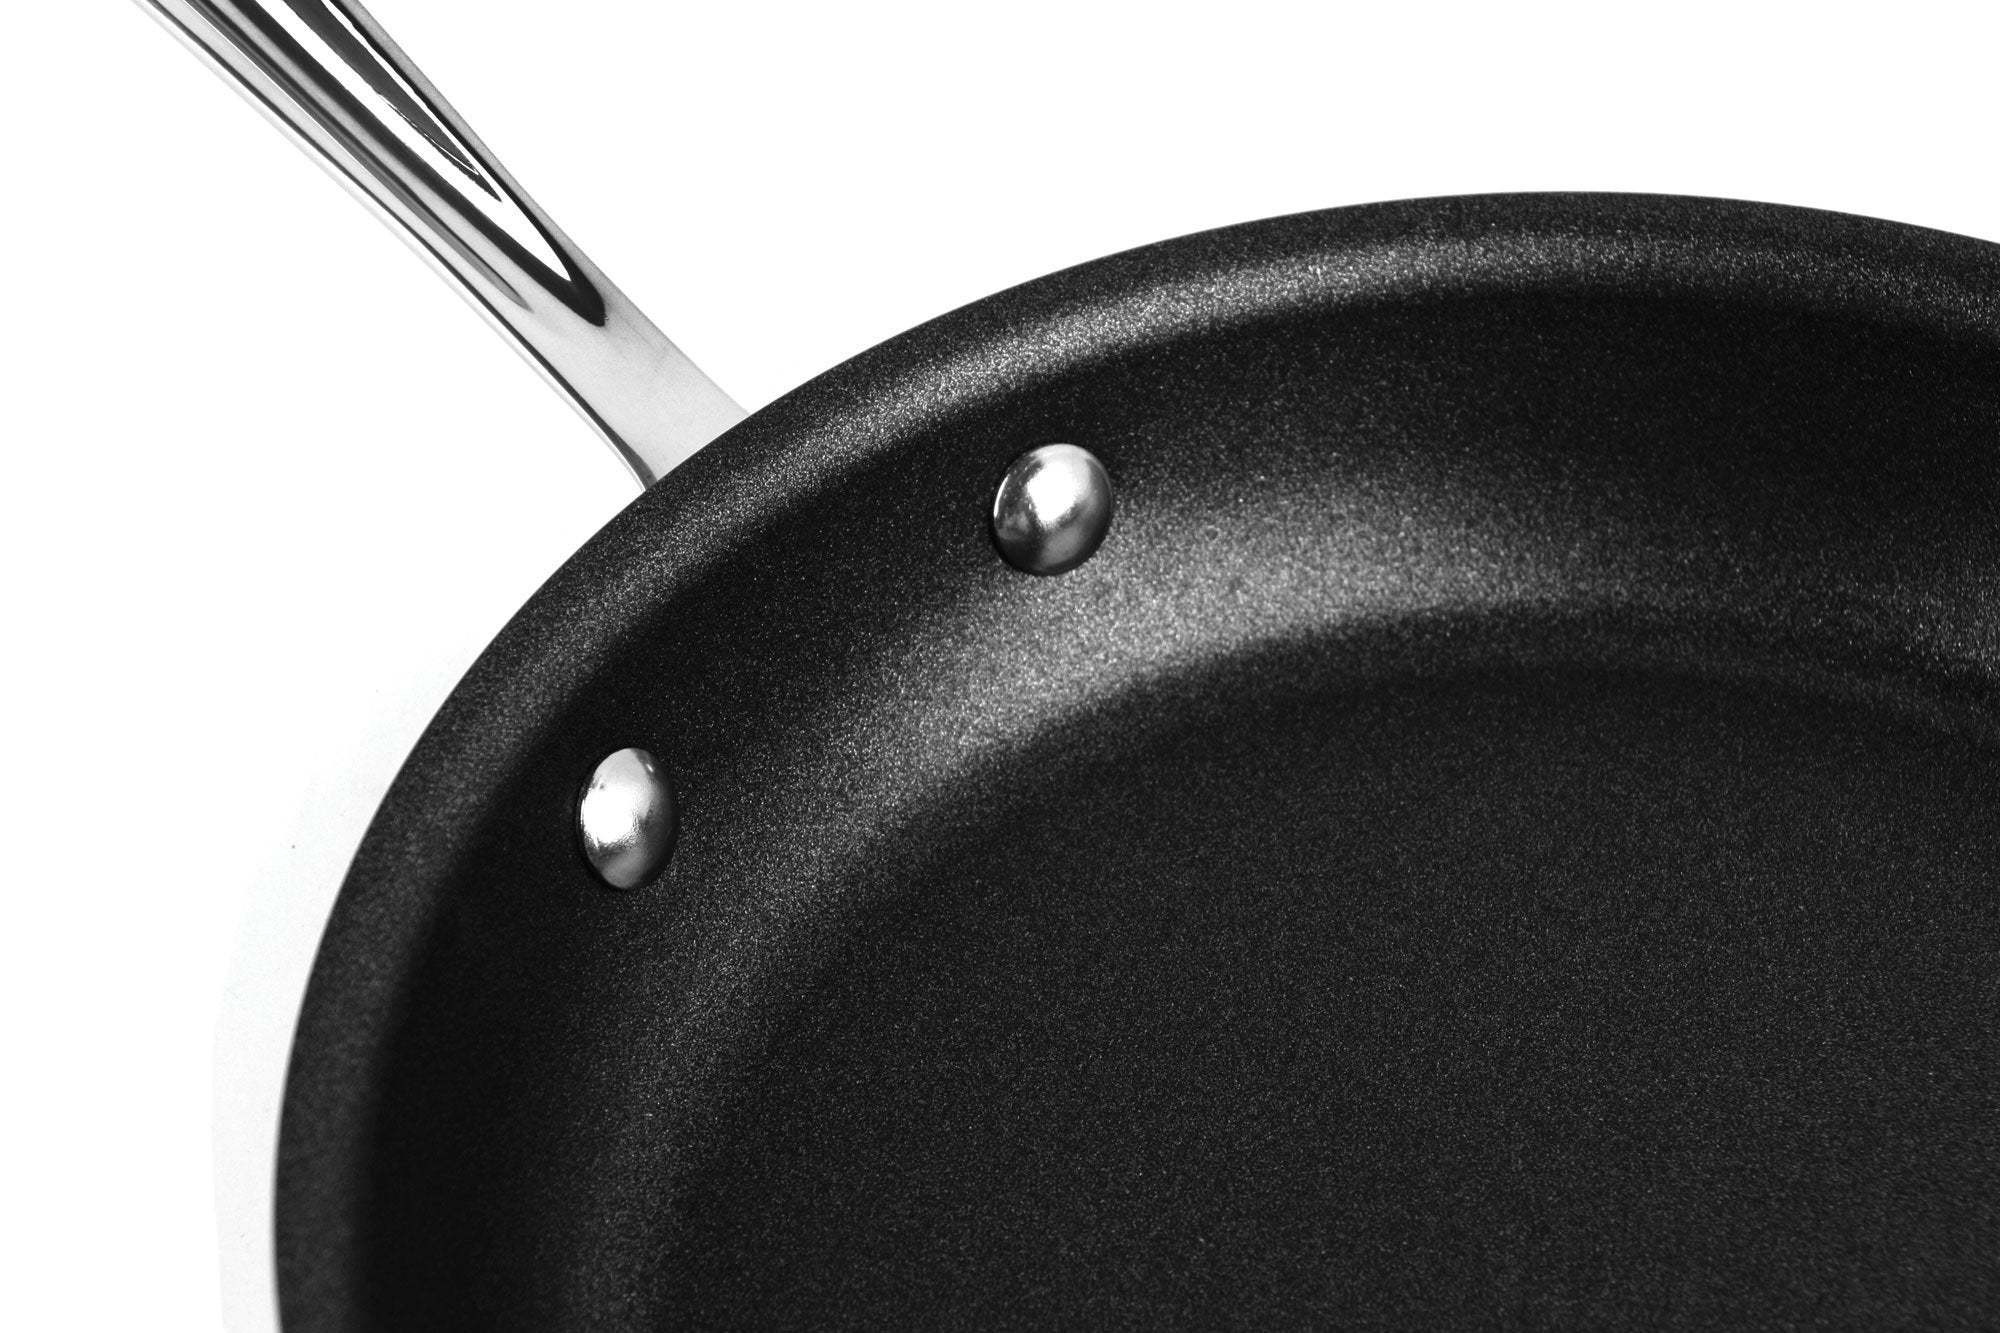 All-Clad 11-Inch Nonstick Square Grille Pan – Pryde's Kitchen & Necessities